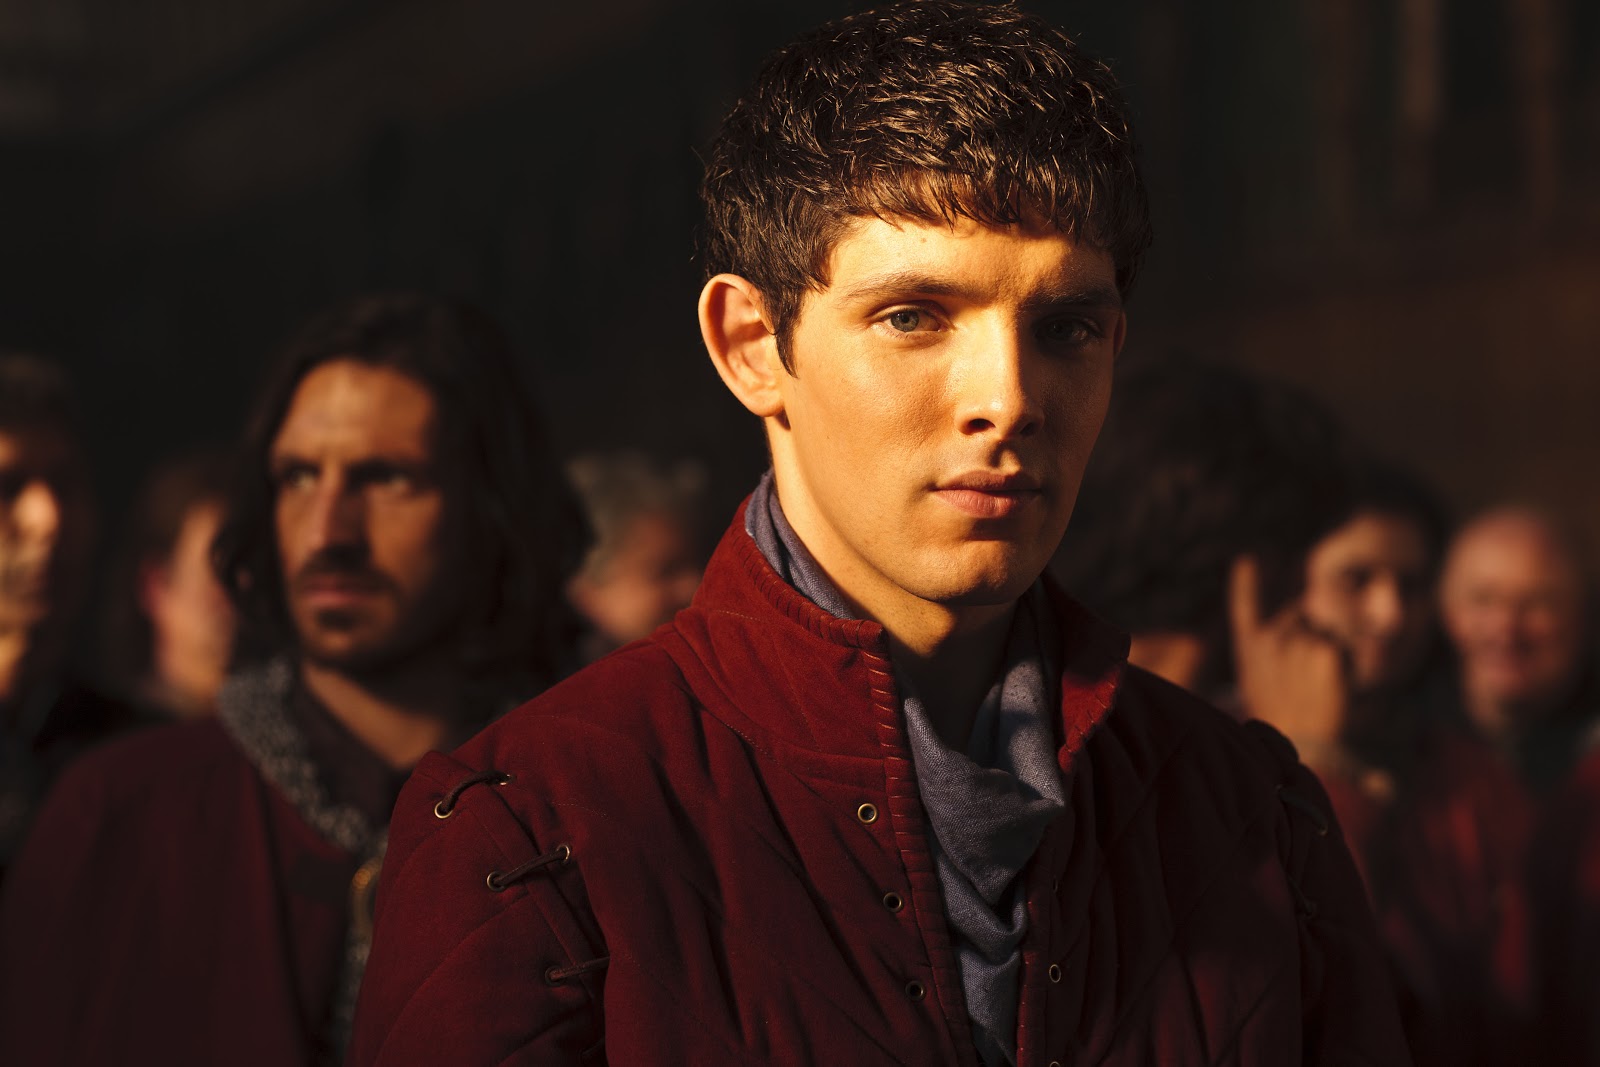 MERLIN CULT CLASSIC Connecting BBC TV Series Merlin W/ NewsFacts.